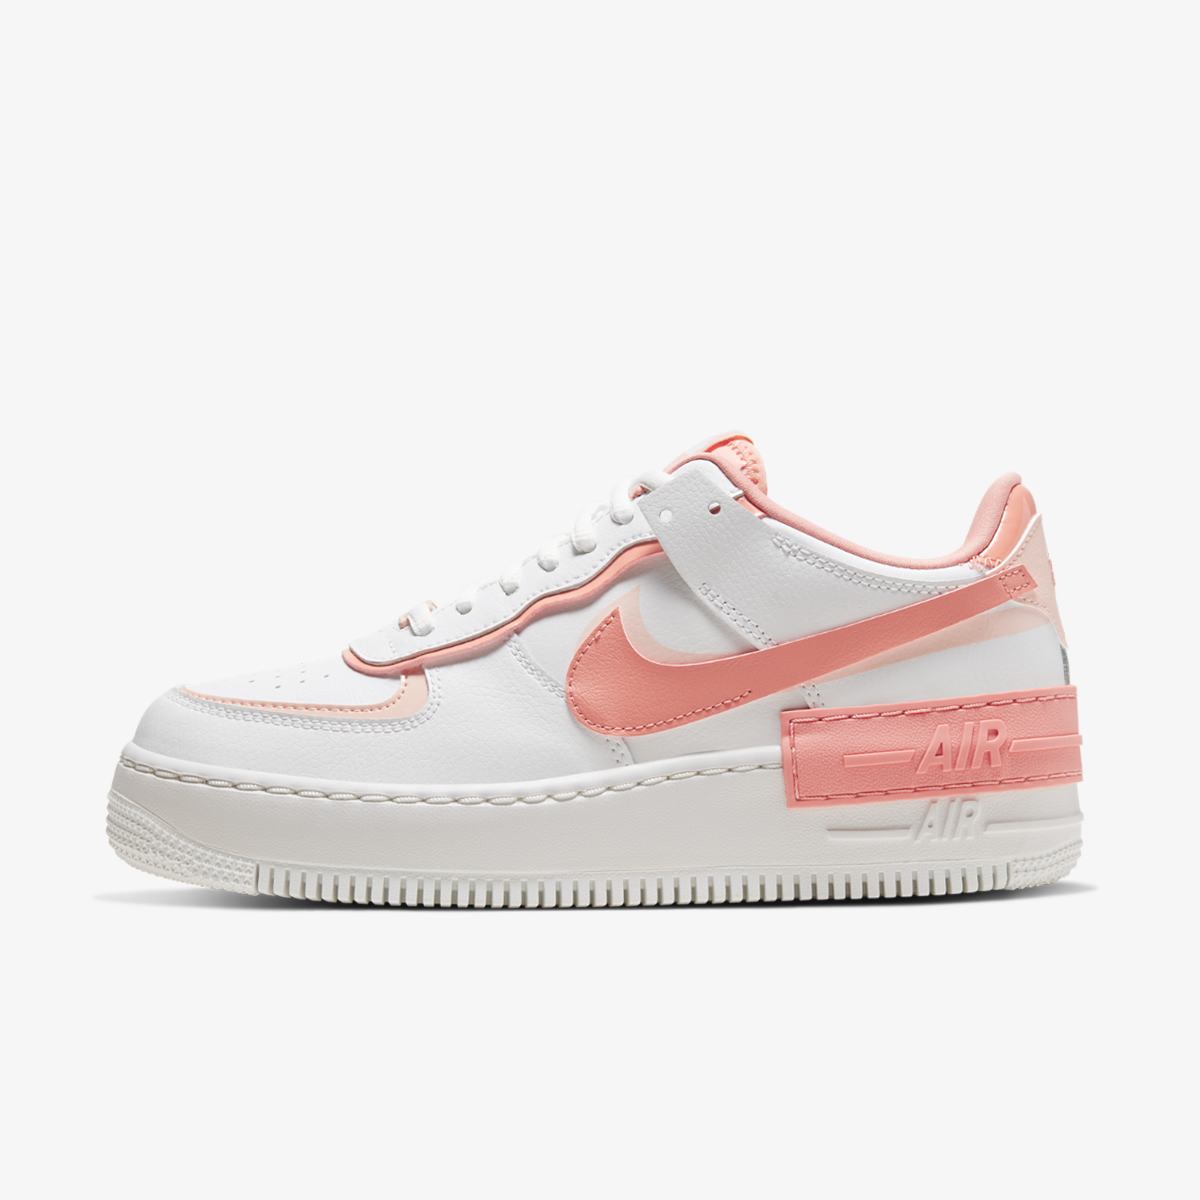 af1 pink and white